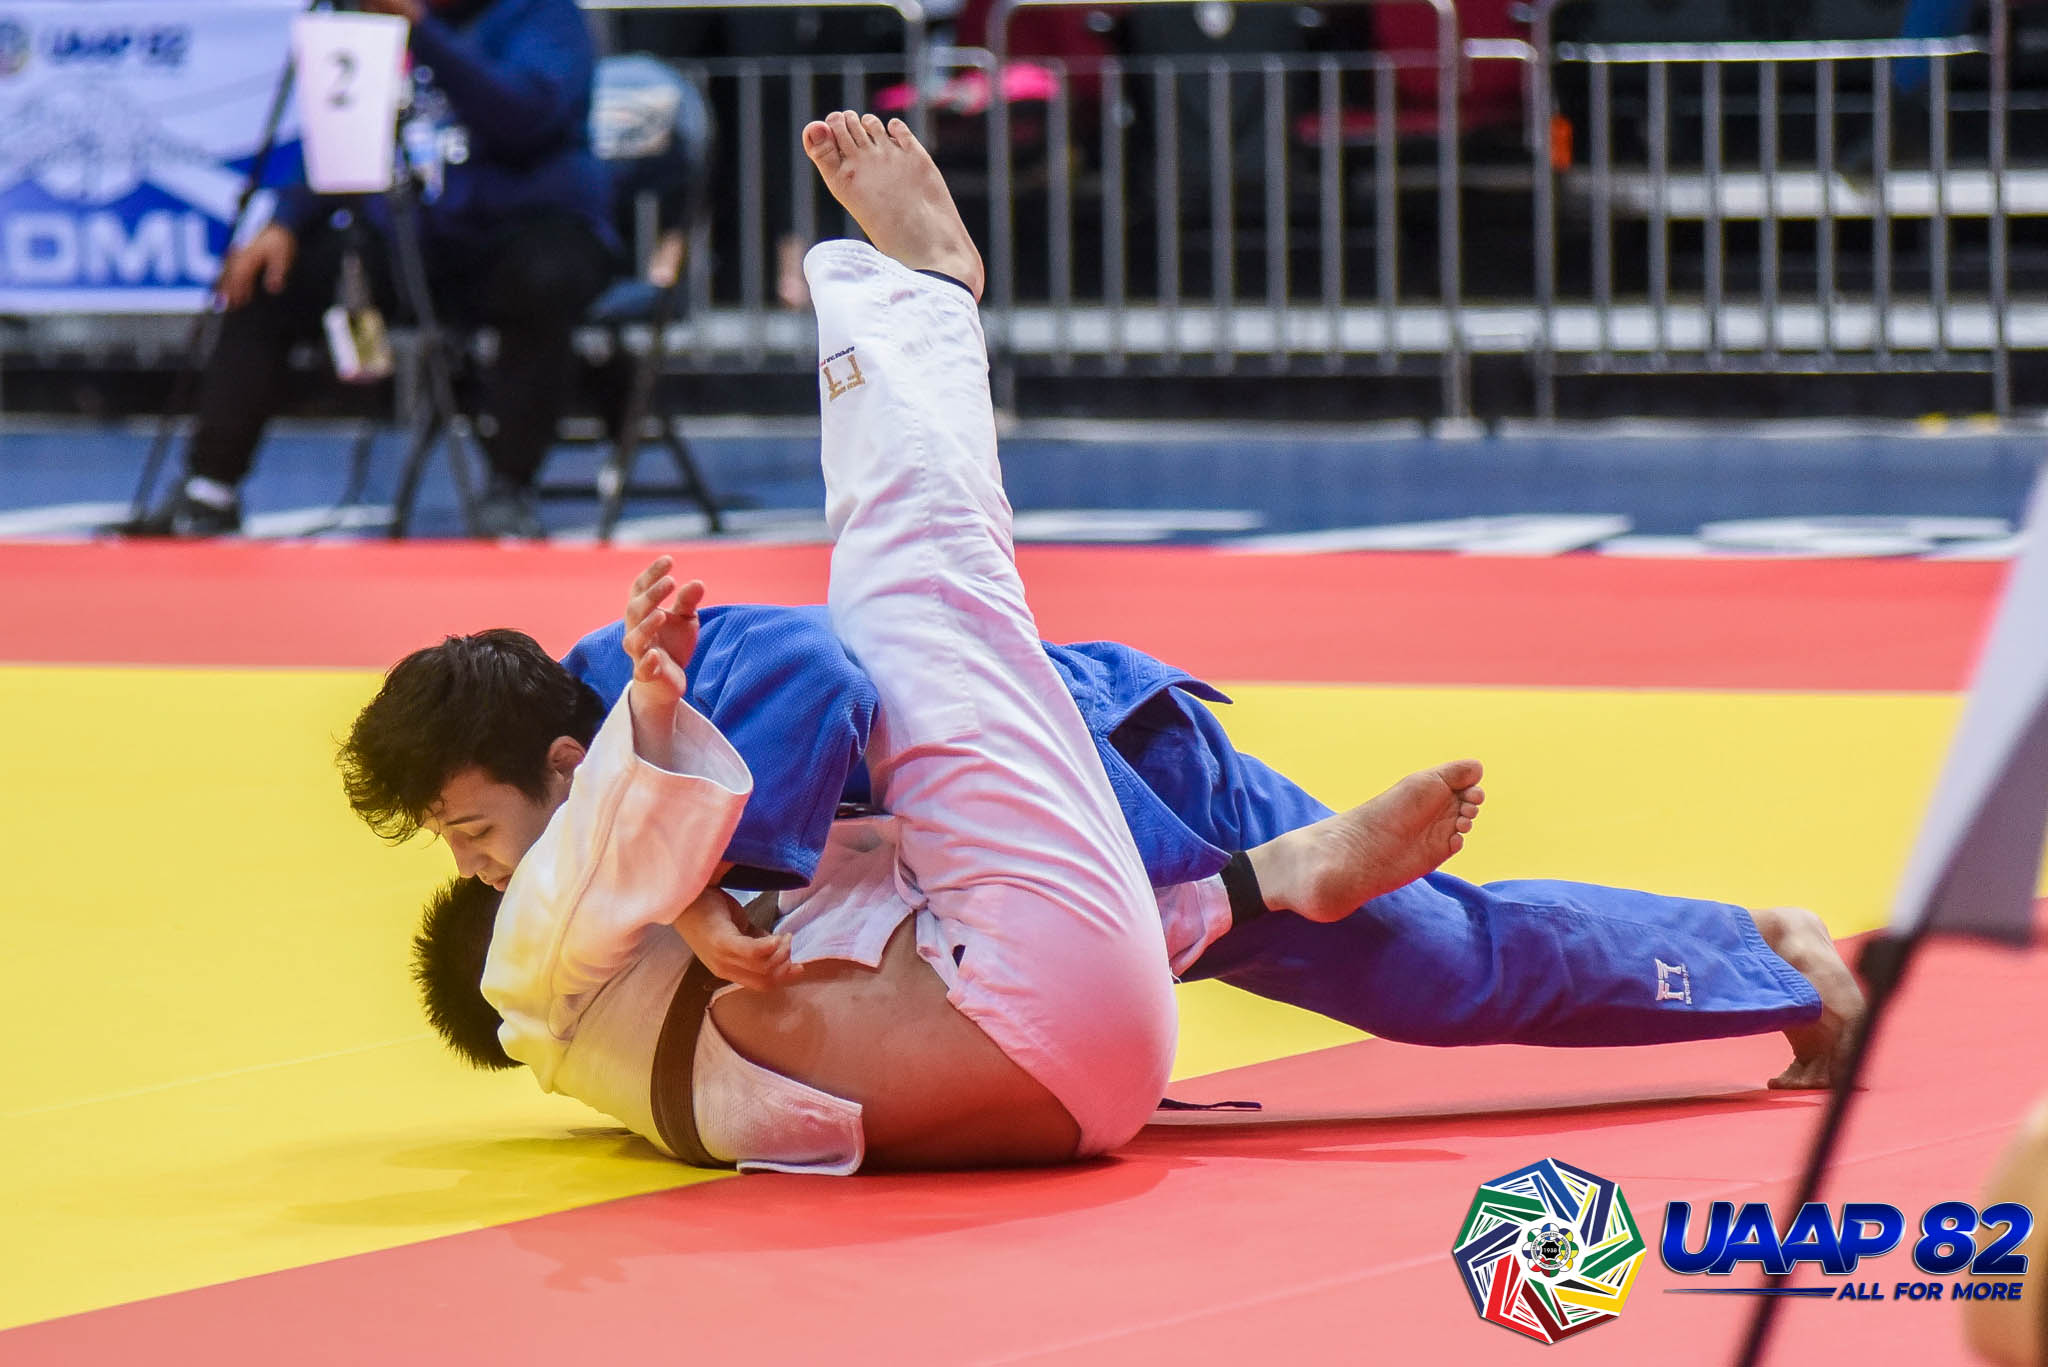 UAAP82-JUDO-SRS-81KG-MENS-3RD-PHOTO-WHITE-AMORES-UST-BLUE-MARGULIES-ADMU Zarchie Garay stuns Keith Reyes as UP holds lead over UST in UAAP Judo ADMU DLSU Judo News UAAP UP UST  - philippine sports news